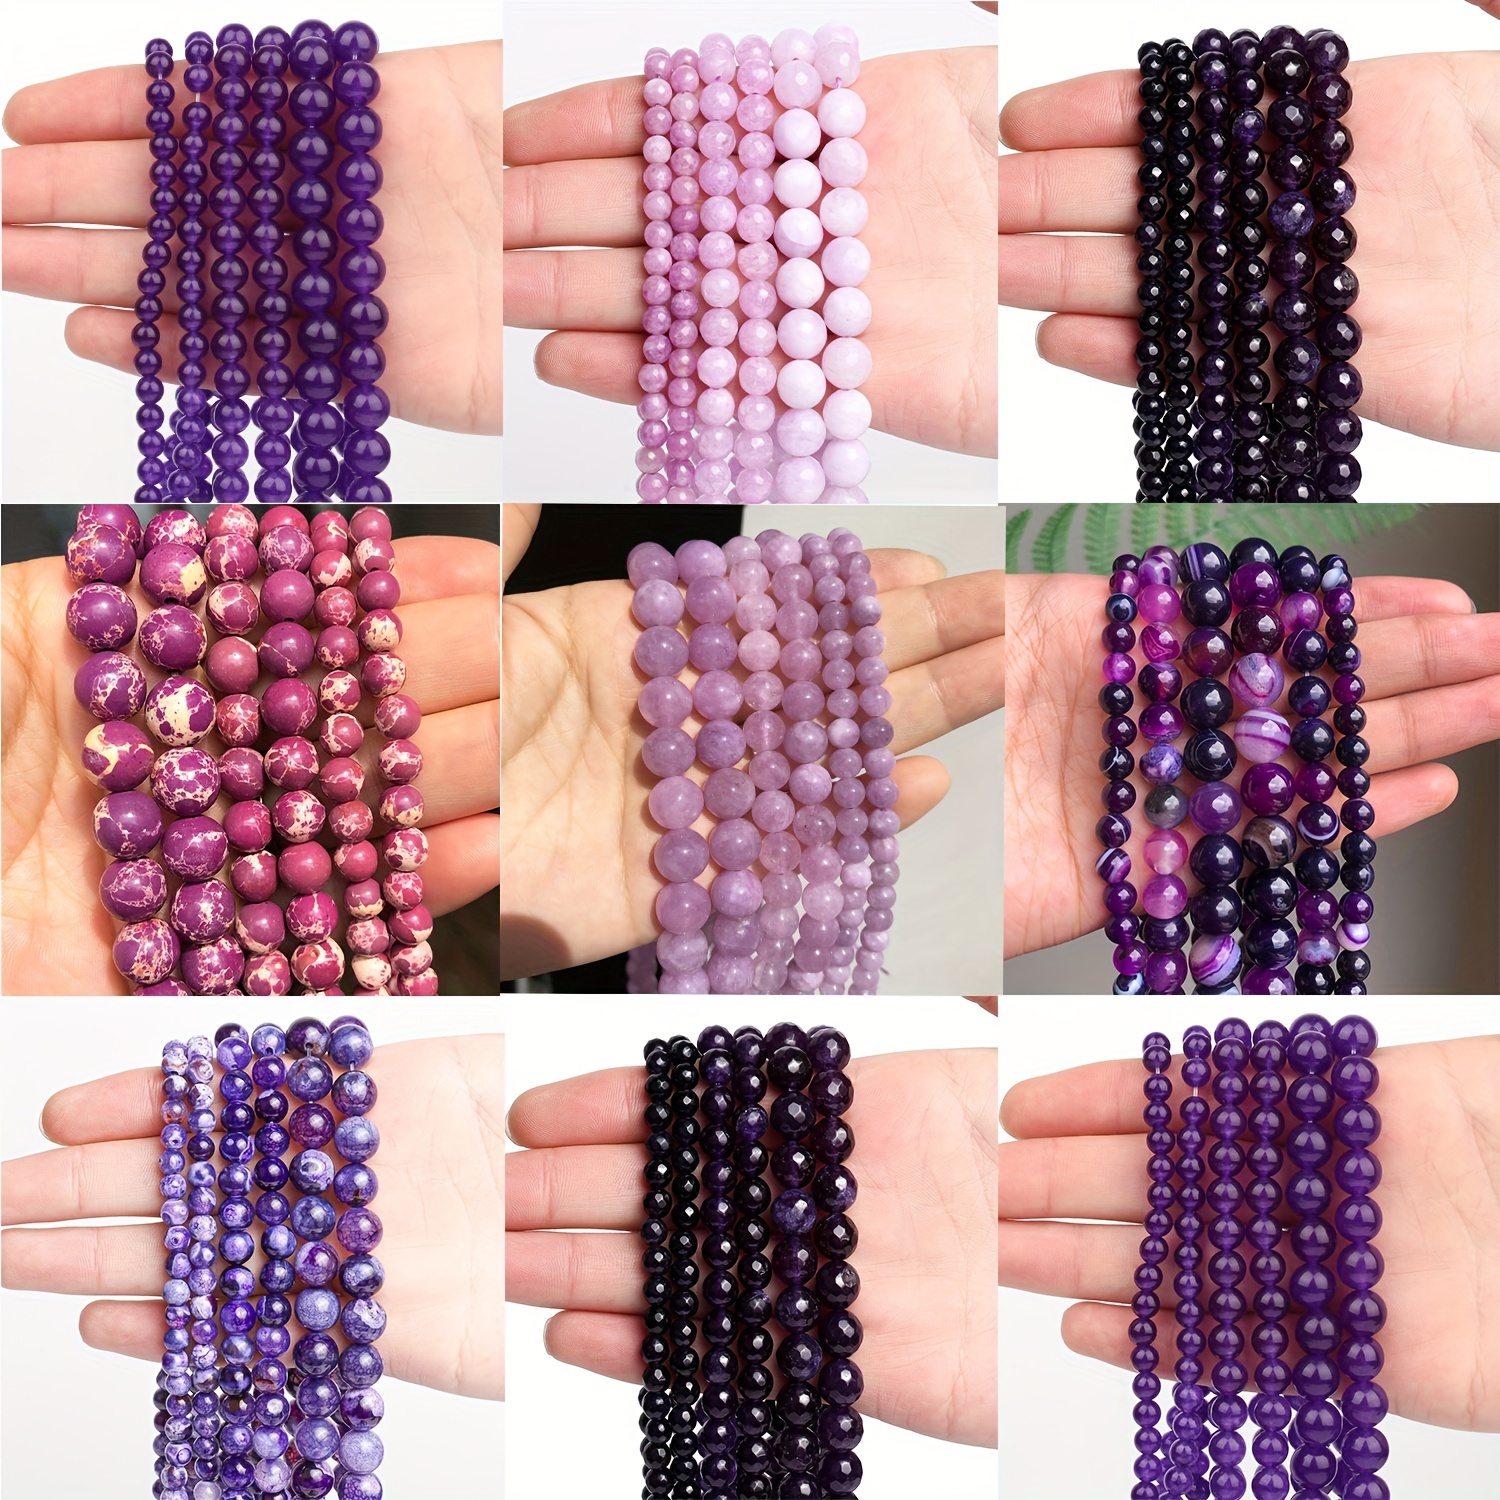 

16 Styles Purple Natural Stone Amethyst Jades Frost Cracked Stone Agates Round Spacer Beads For Jewelry Making Diy Bracelets Necklace Earring Accessories 4/6/8/10/12mm